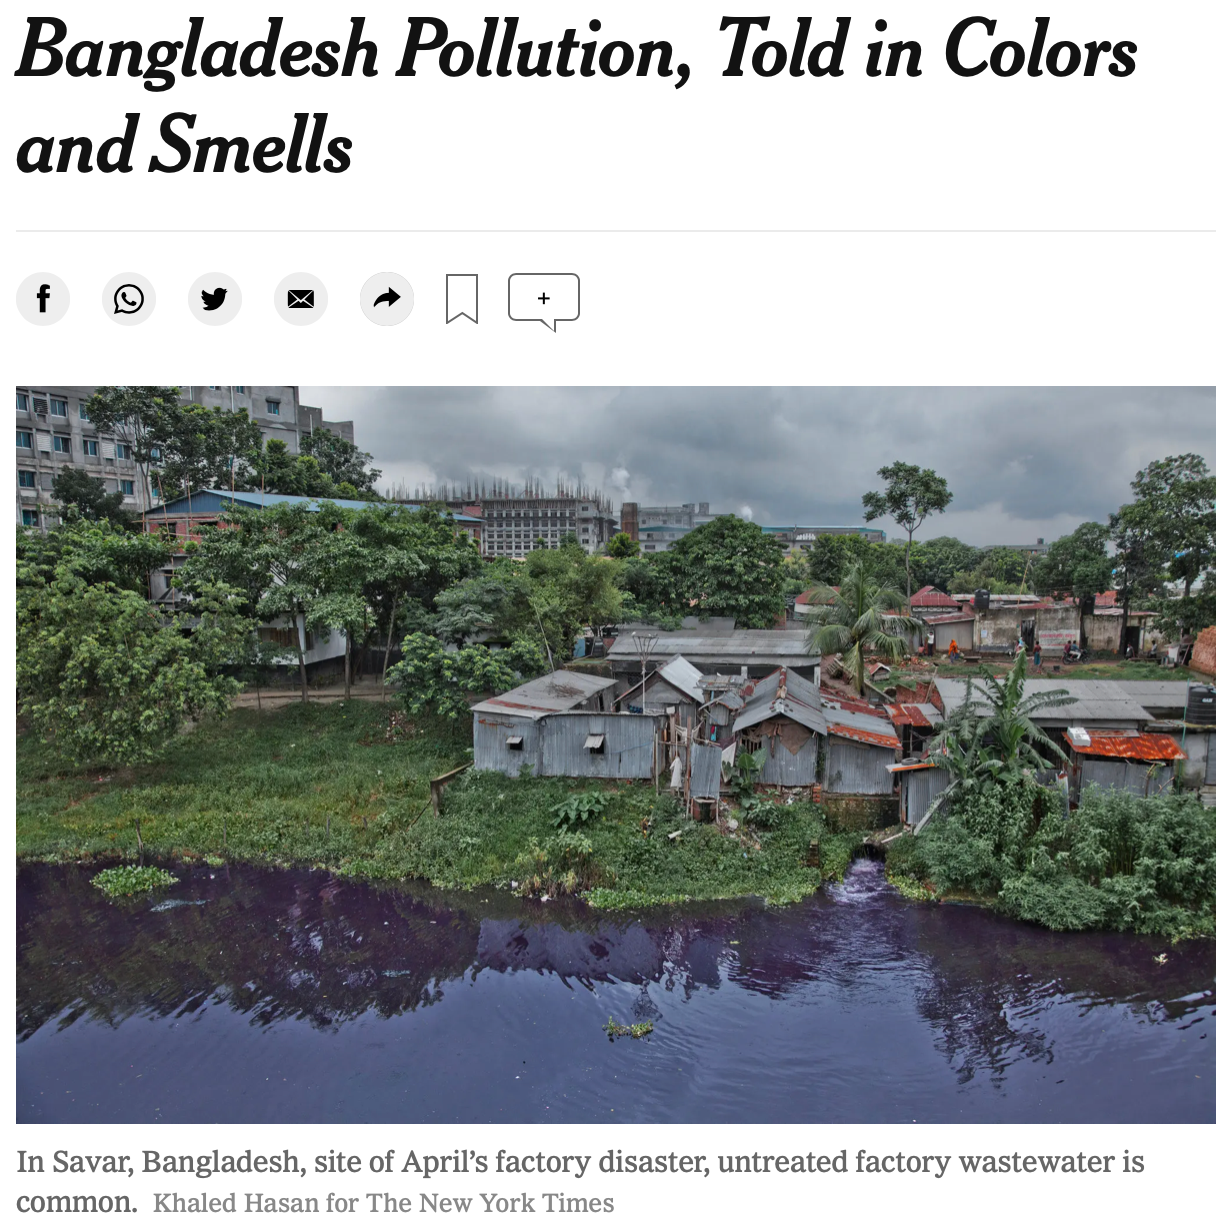 Bangladesh Pollution, Told in Colors and Smells